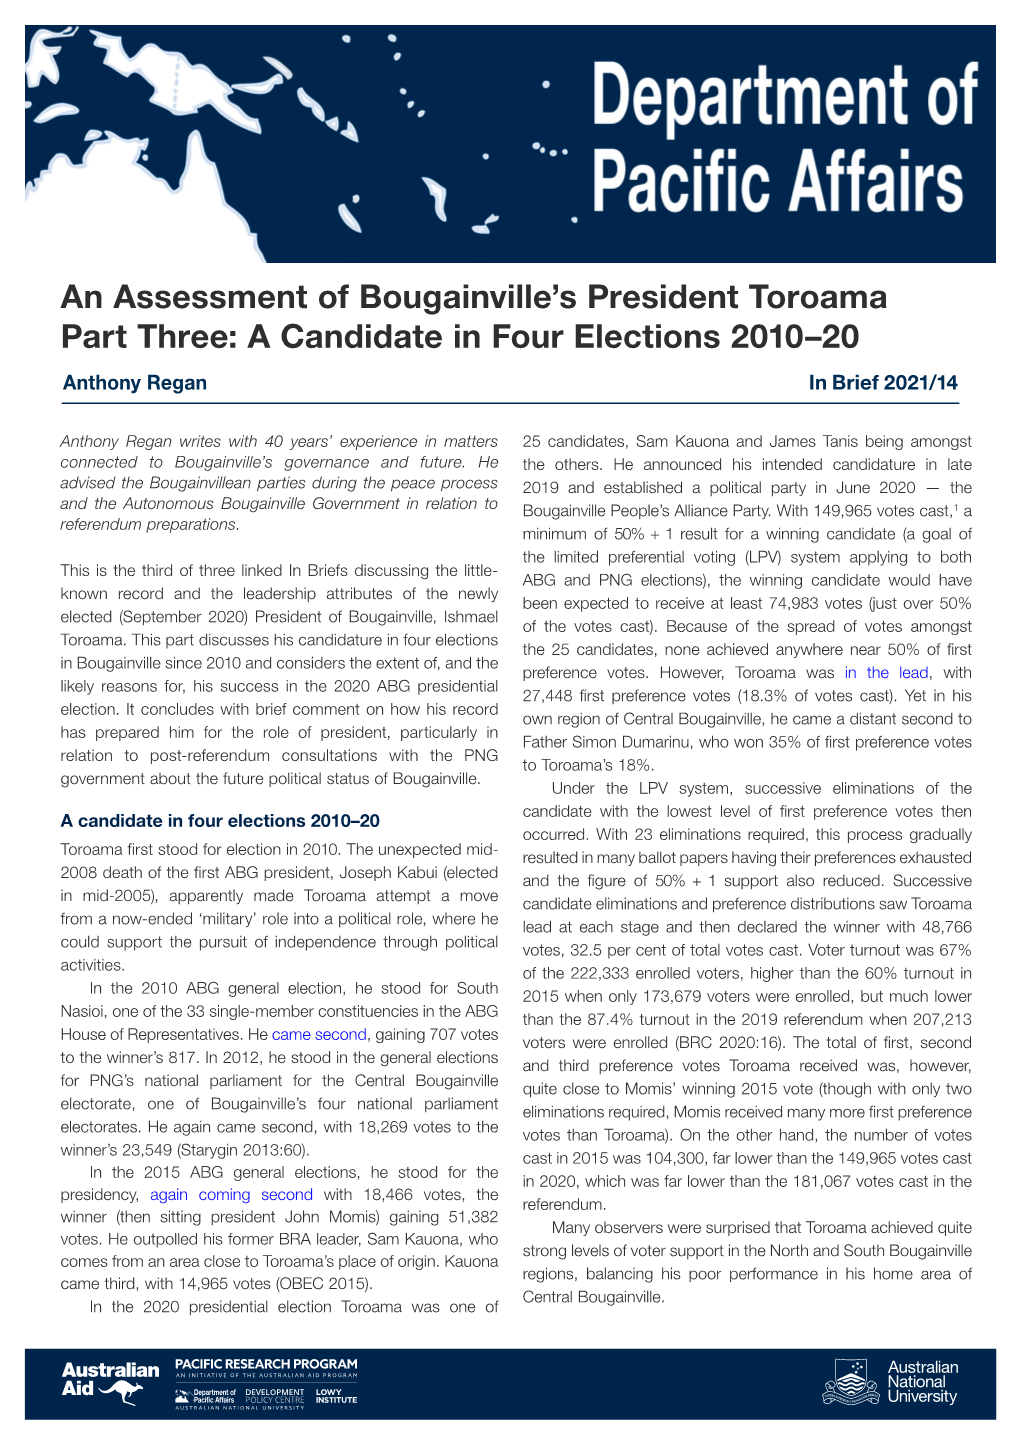 An Assessment of Bougainville's President Toroama Part Three: a Candidate in Four Elections 2010–20